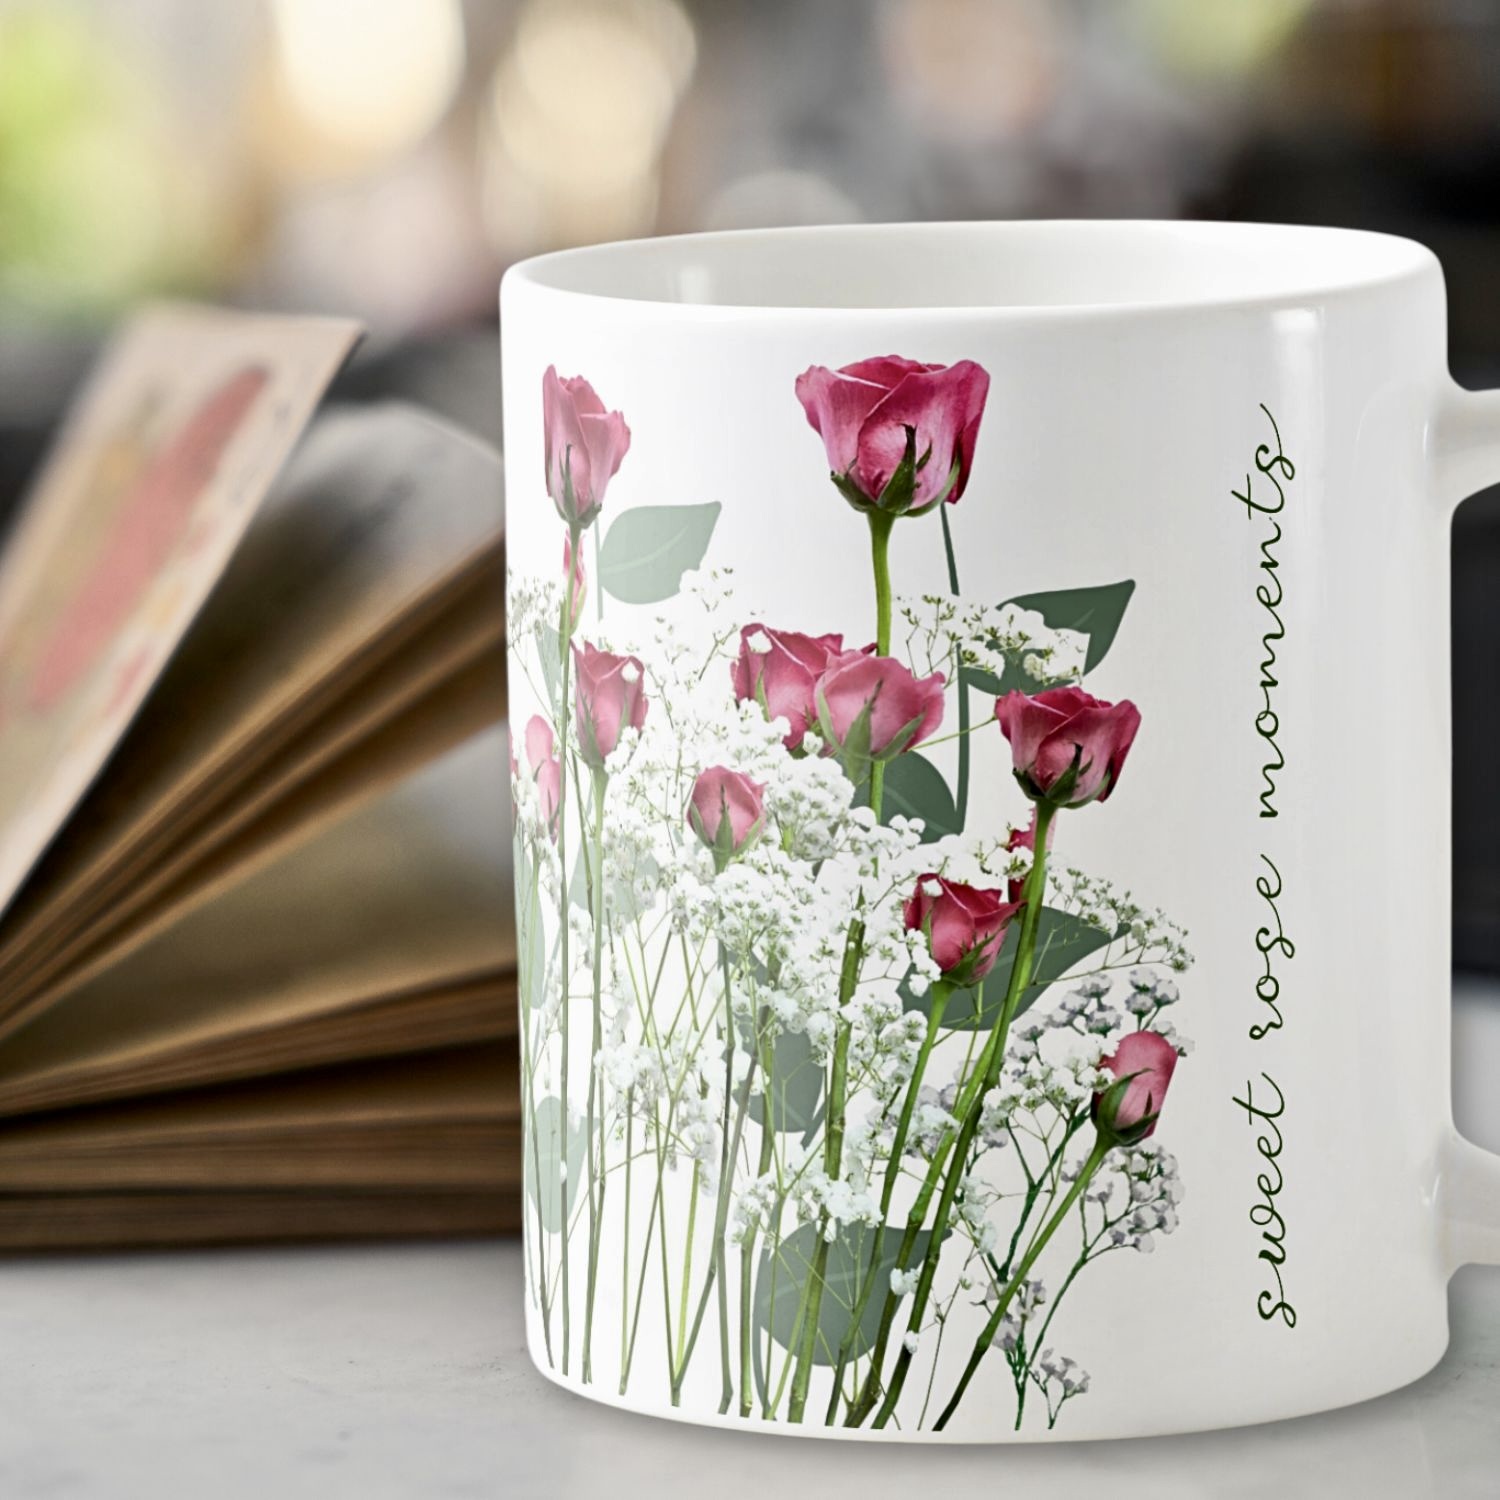 Pink roses mug with mint green stems on white background, with an inspirational quote. Romantic design.